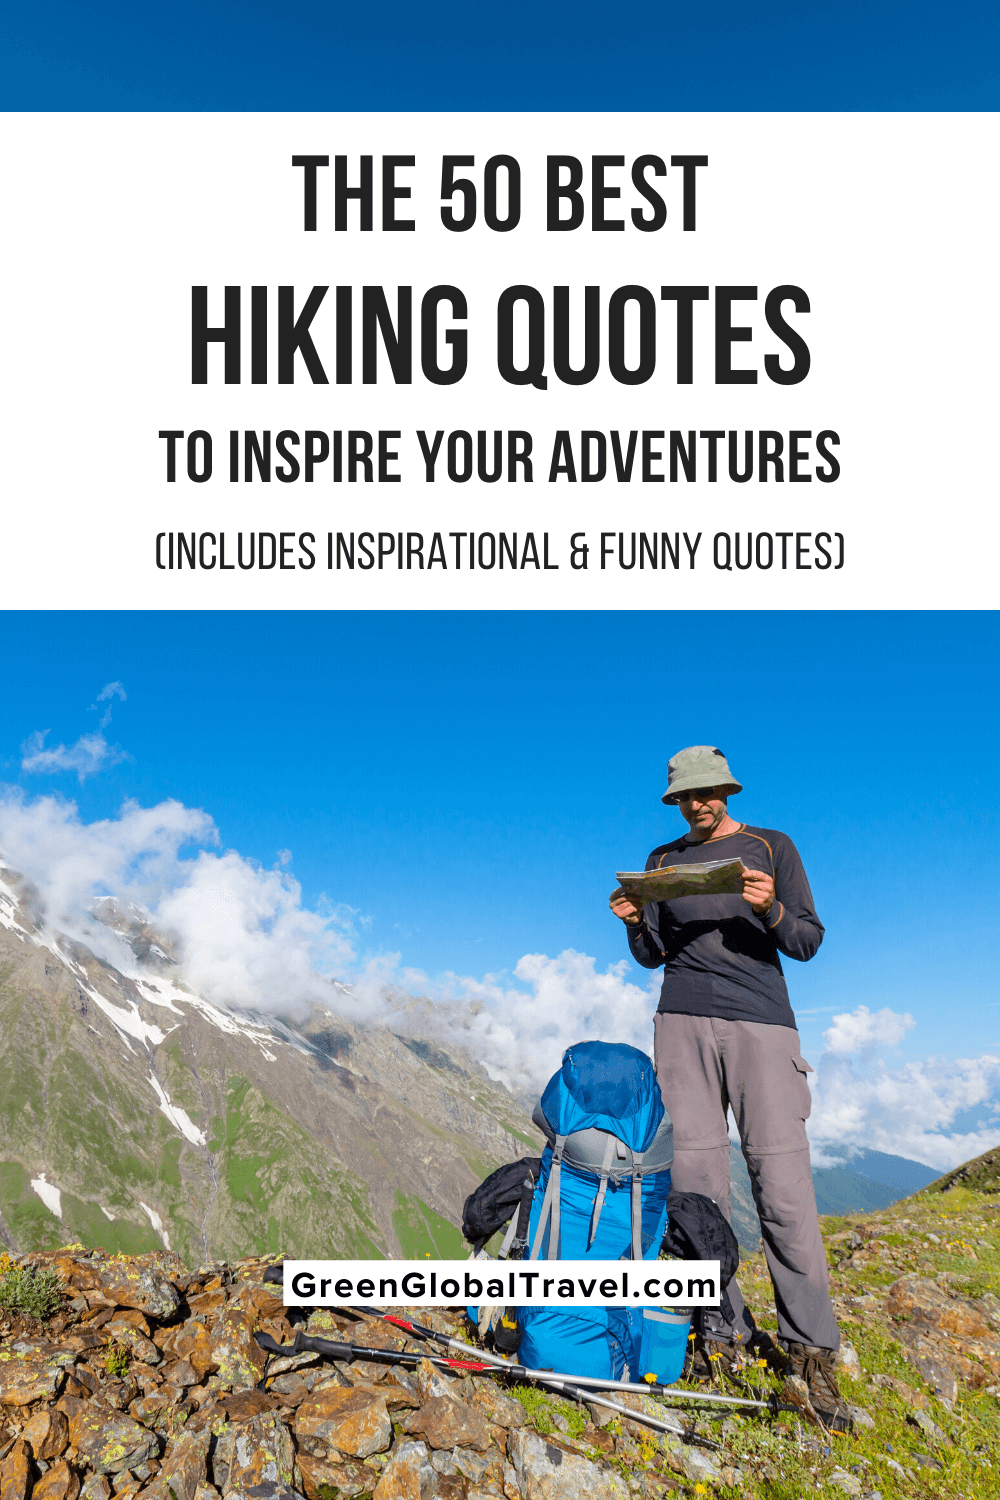 The 50 Best Hiking Quotes to Inspire Your Adventures includes funny hiking quotes, inspirational hiking quotes, and John Muir quotes on hiking. | quotes about hiking | hiking captions | hiking quotes funny | hiking funny quotes | funny quotes about hiking | hiking instagram captions | funny hiking captions | trekking captions | hiking with friends quotes | hiking quotes for instagram | caption for hiking | mountain hiking quotes | inspiring hiking quotes | quotes about hiking mountains |